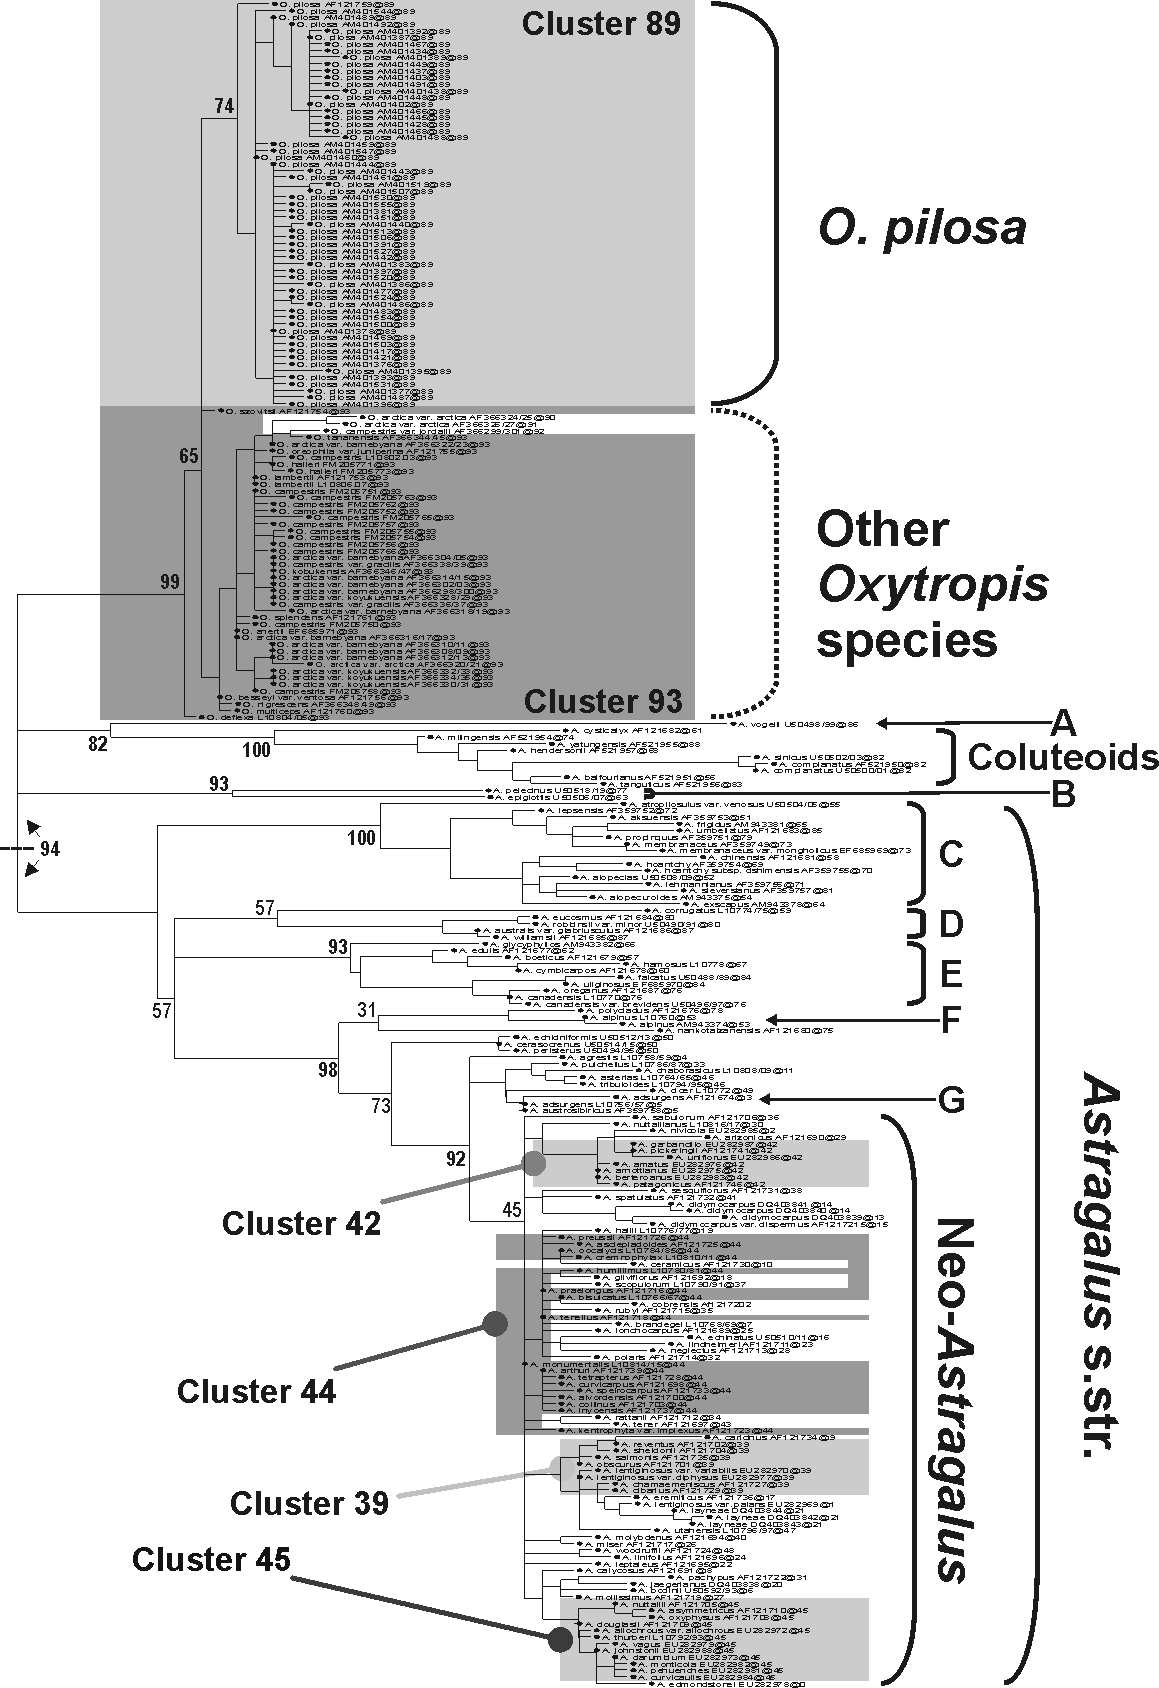 Species-level cluster in the Astragalus-Oxytropis complex